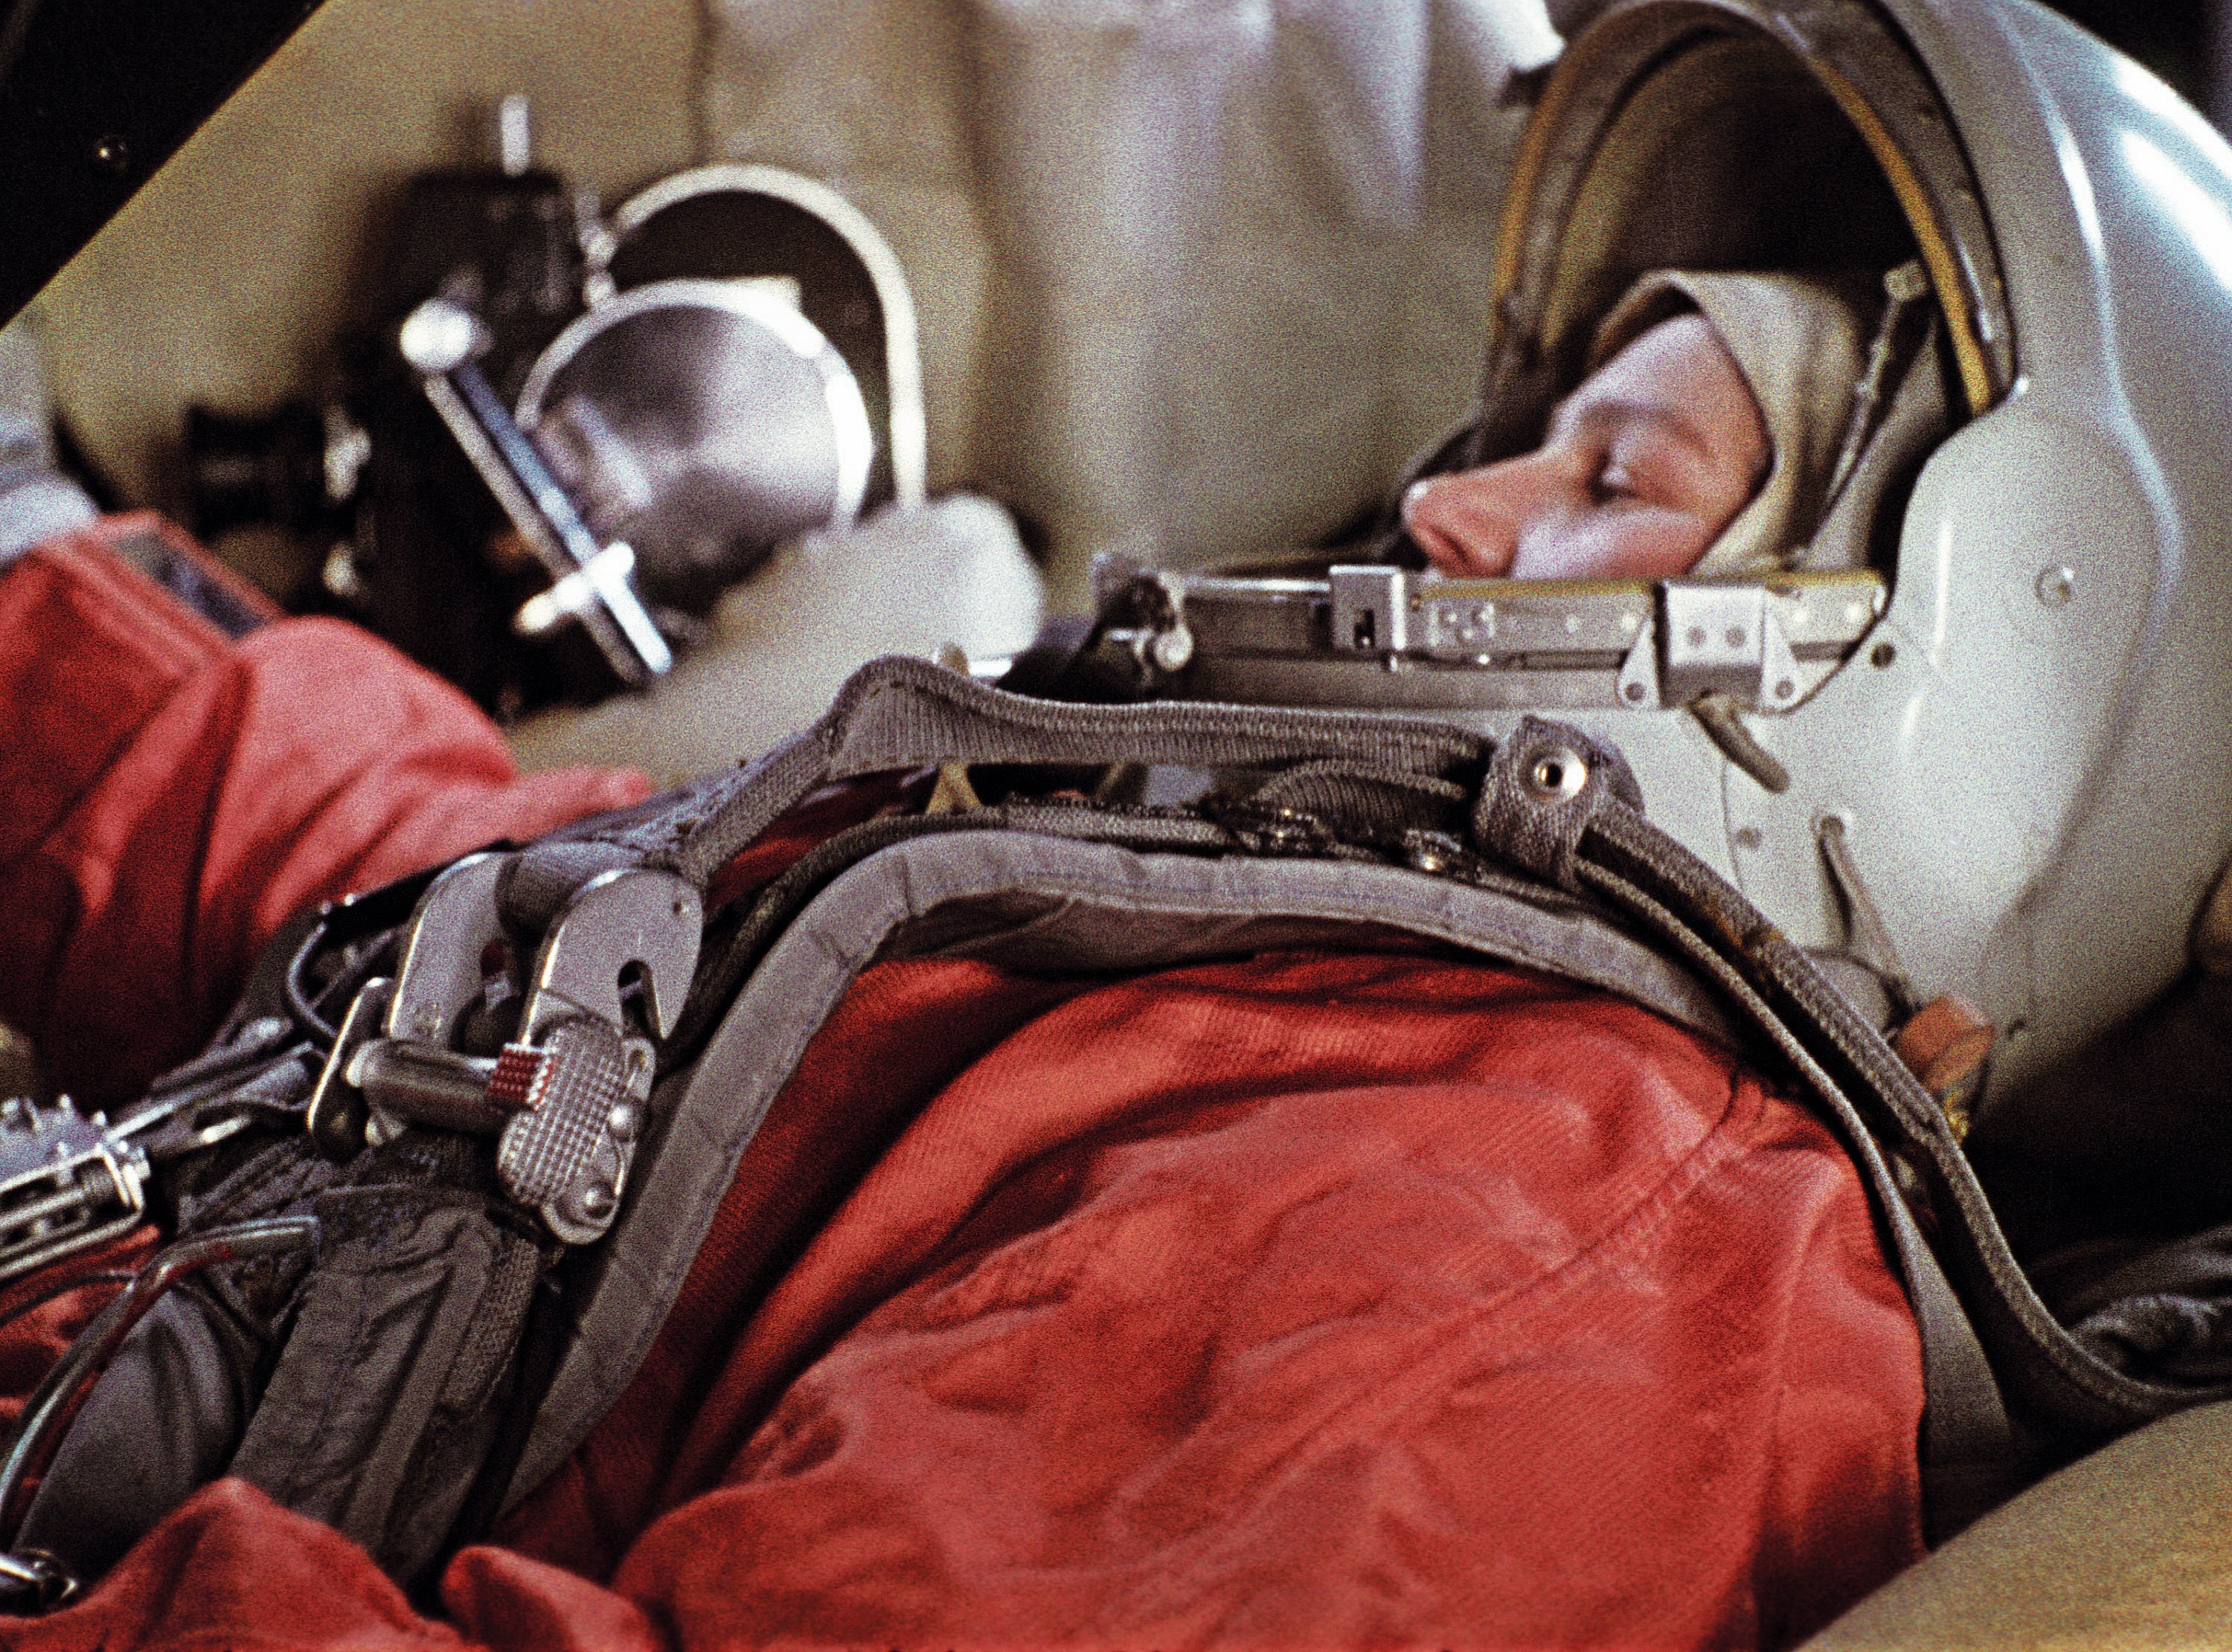 In 1963, Valentina Tereshkova became the first woman to fly in space